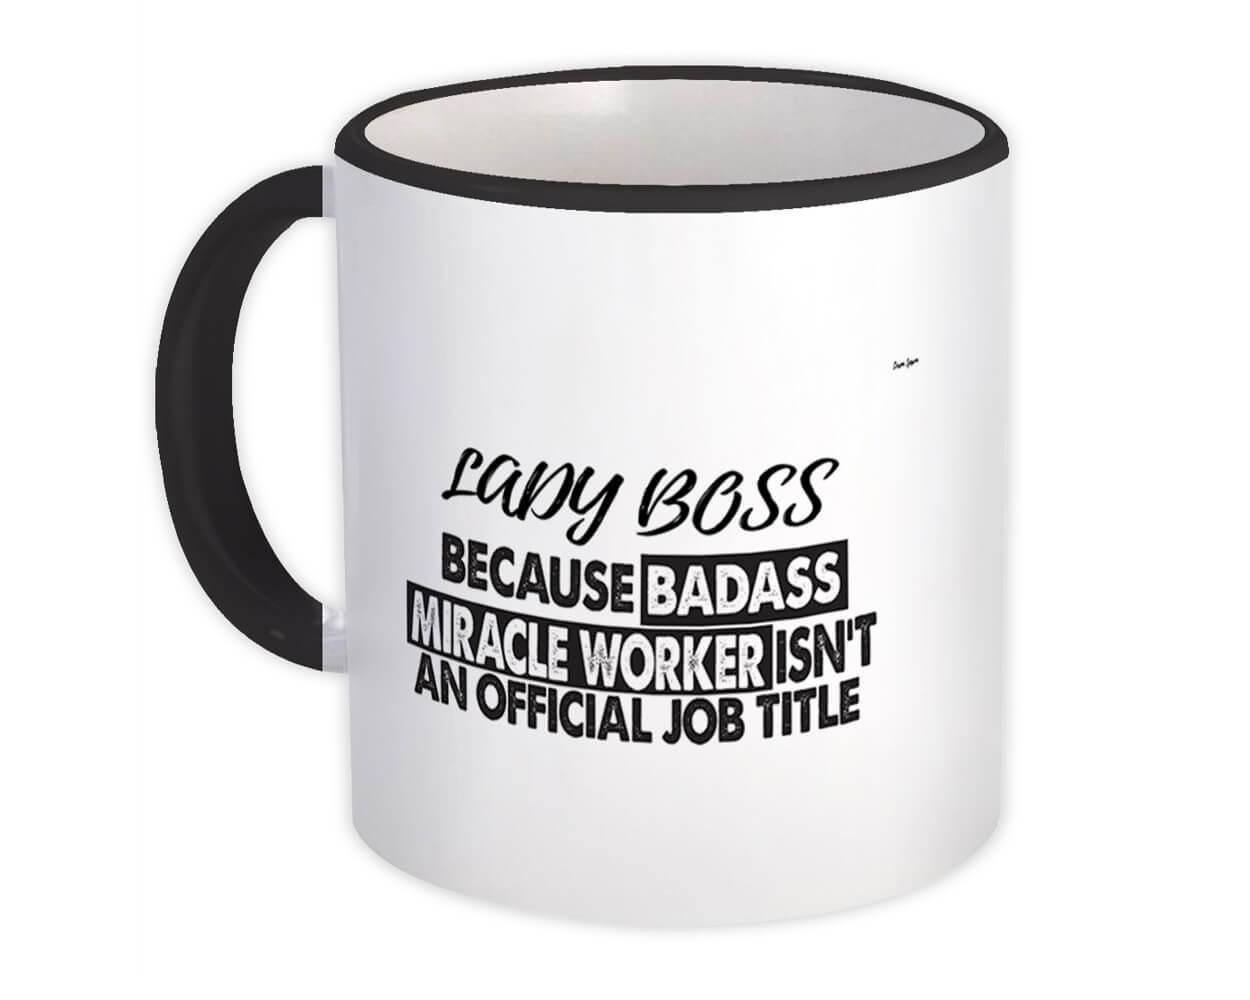 LADY BOSS Badass Miracle Worker : Gift Mug Official Job Title Profession Office - $15.90